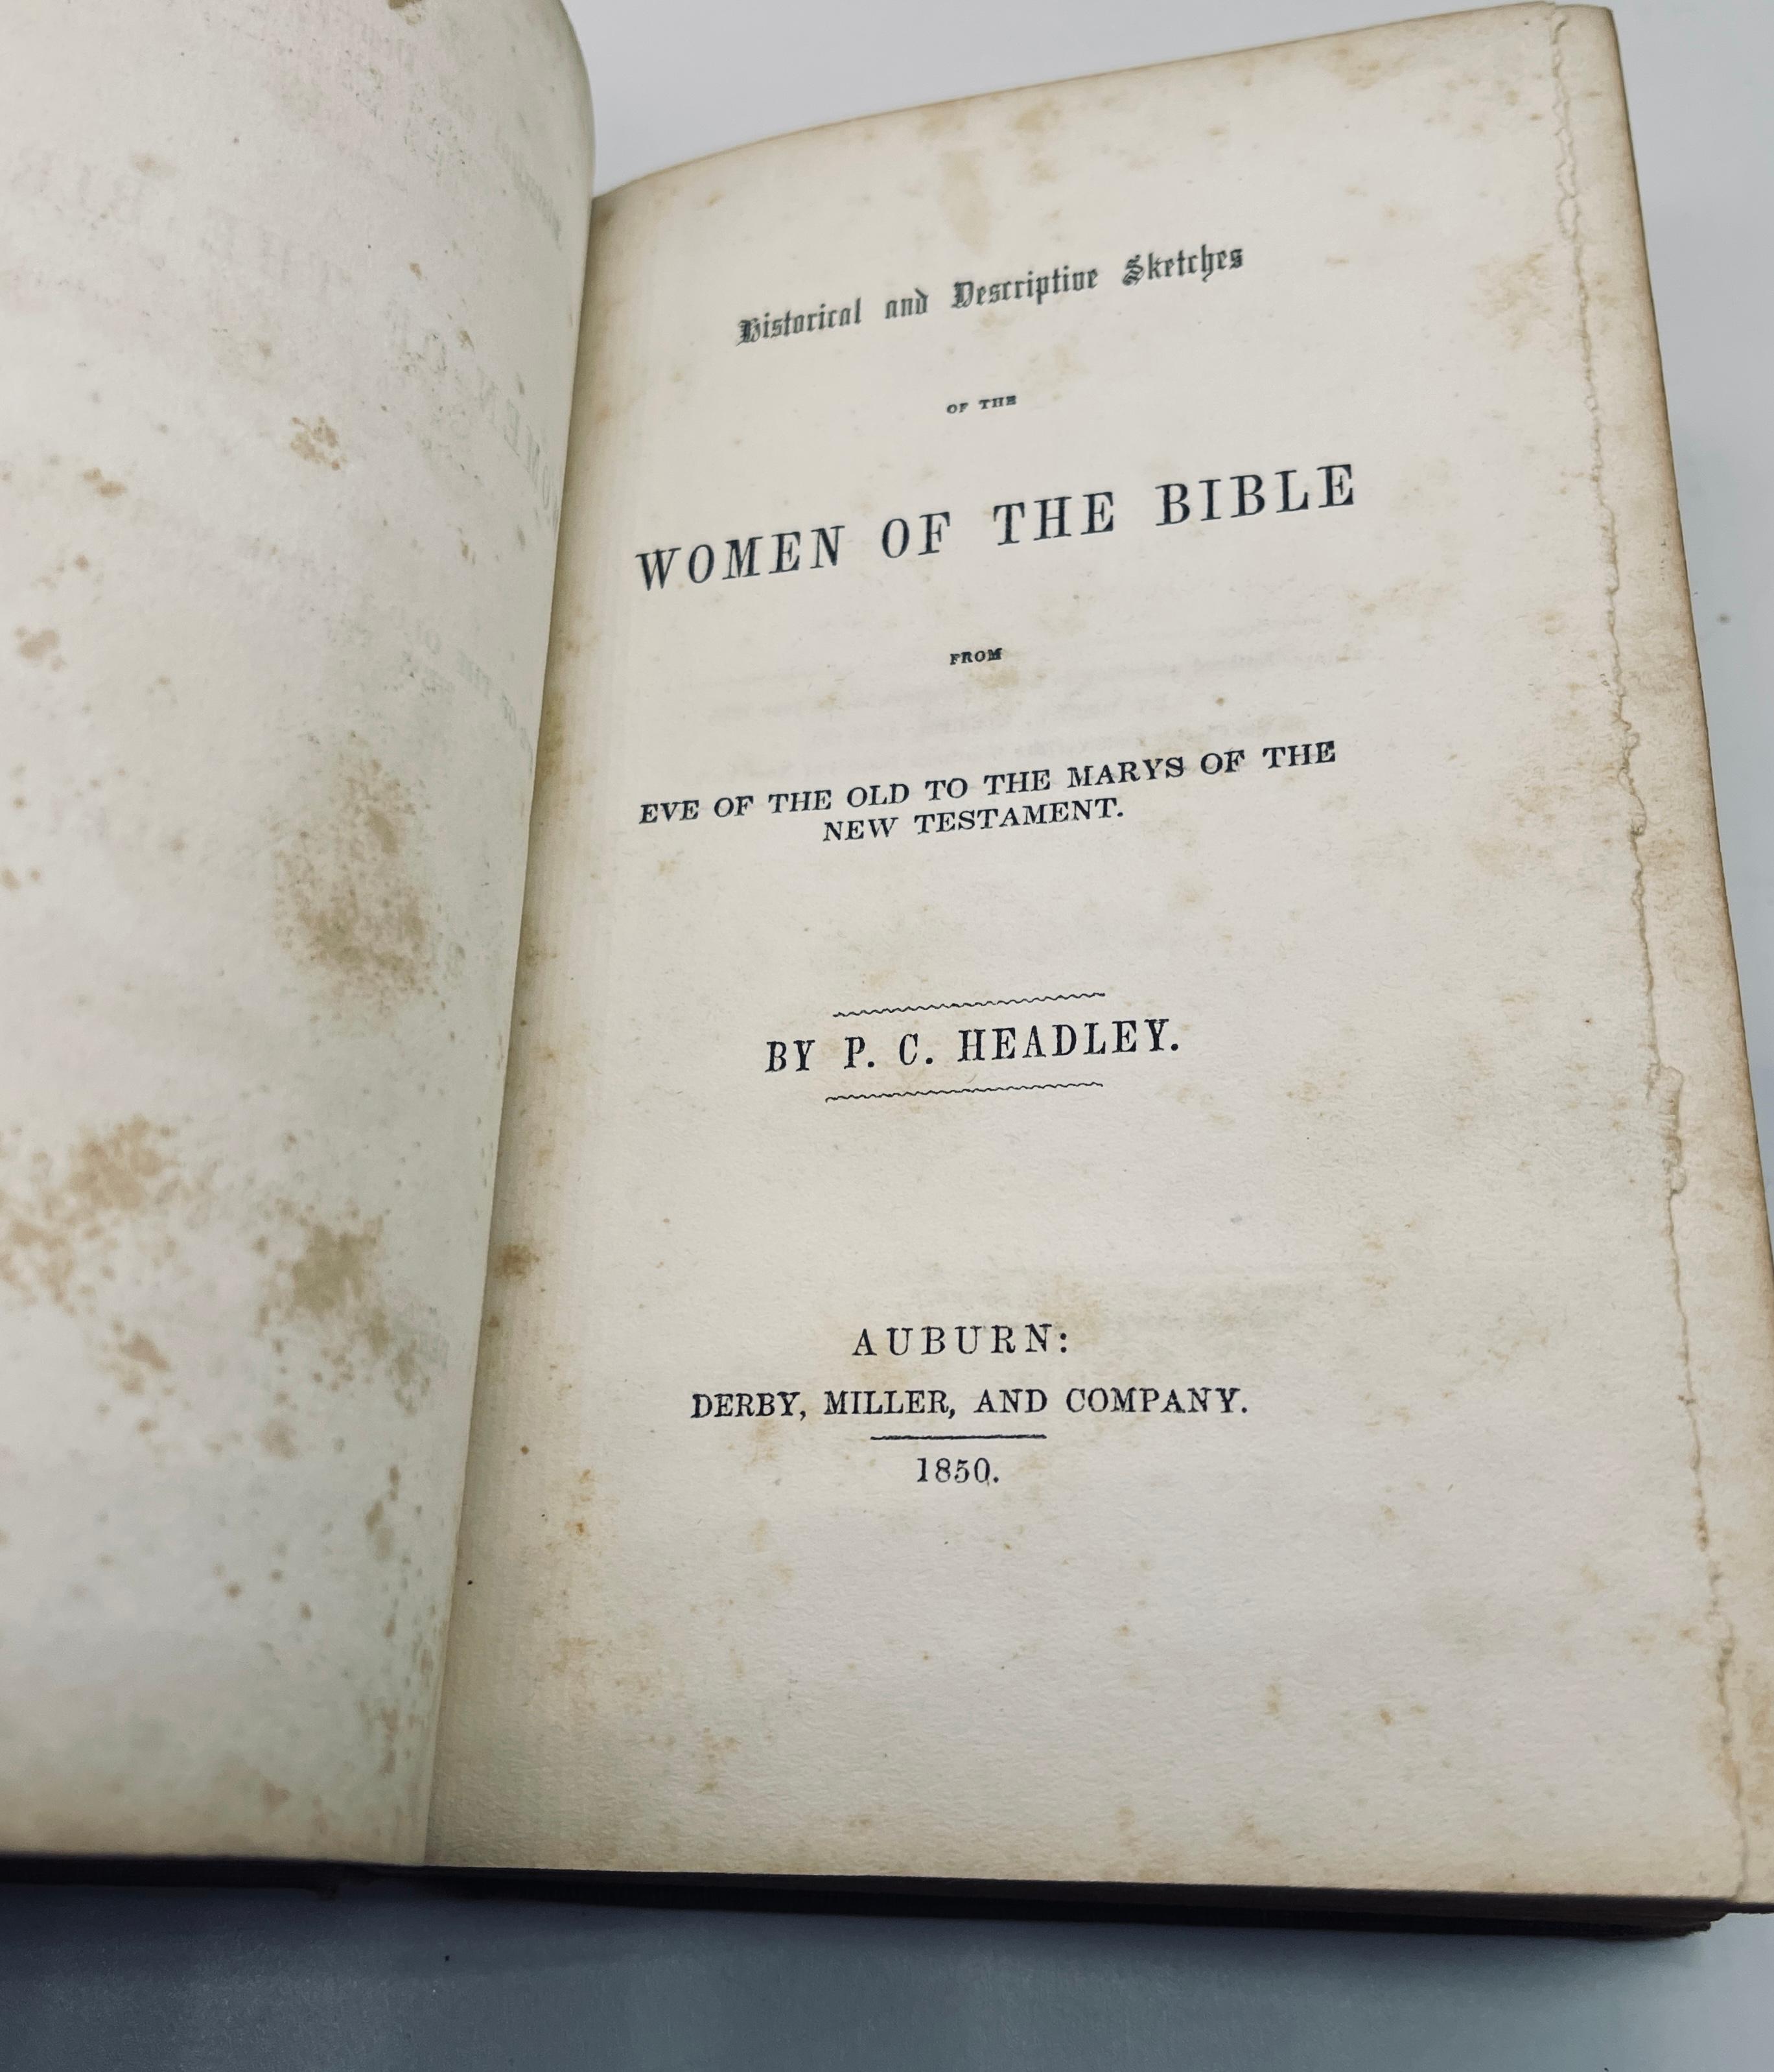 Historical And Descriptive Sketches Of The WOMEN OF THE BIBLE (1850)